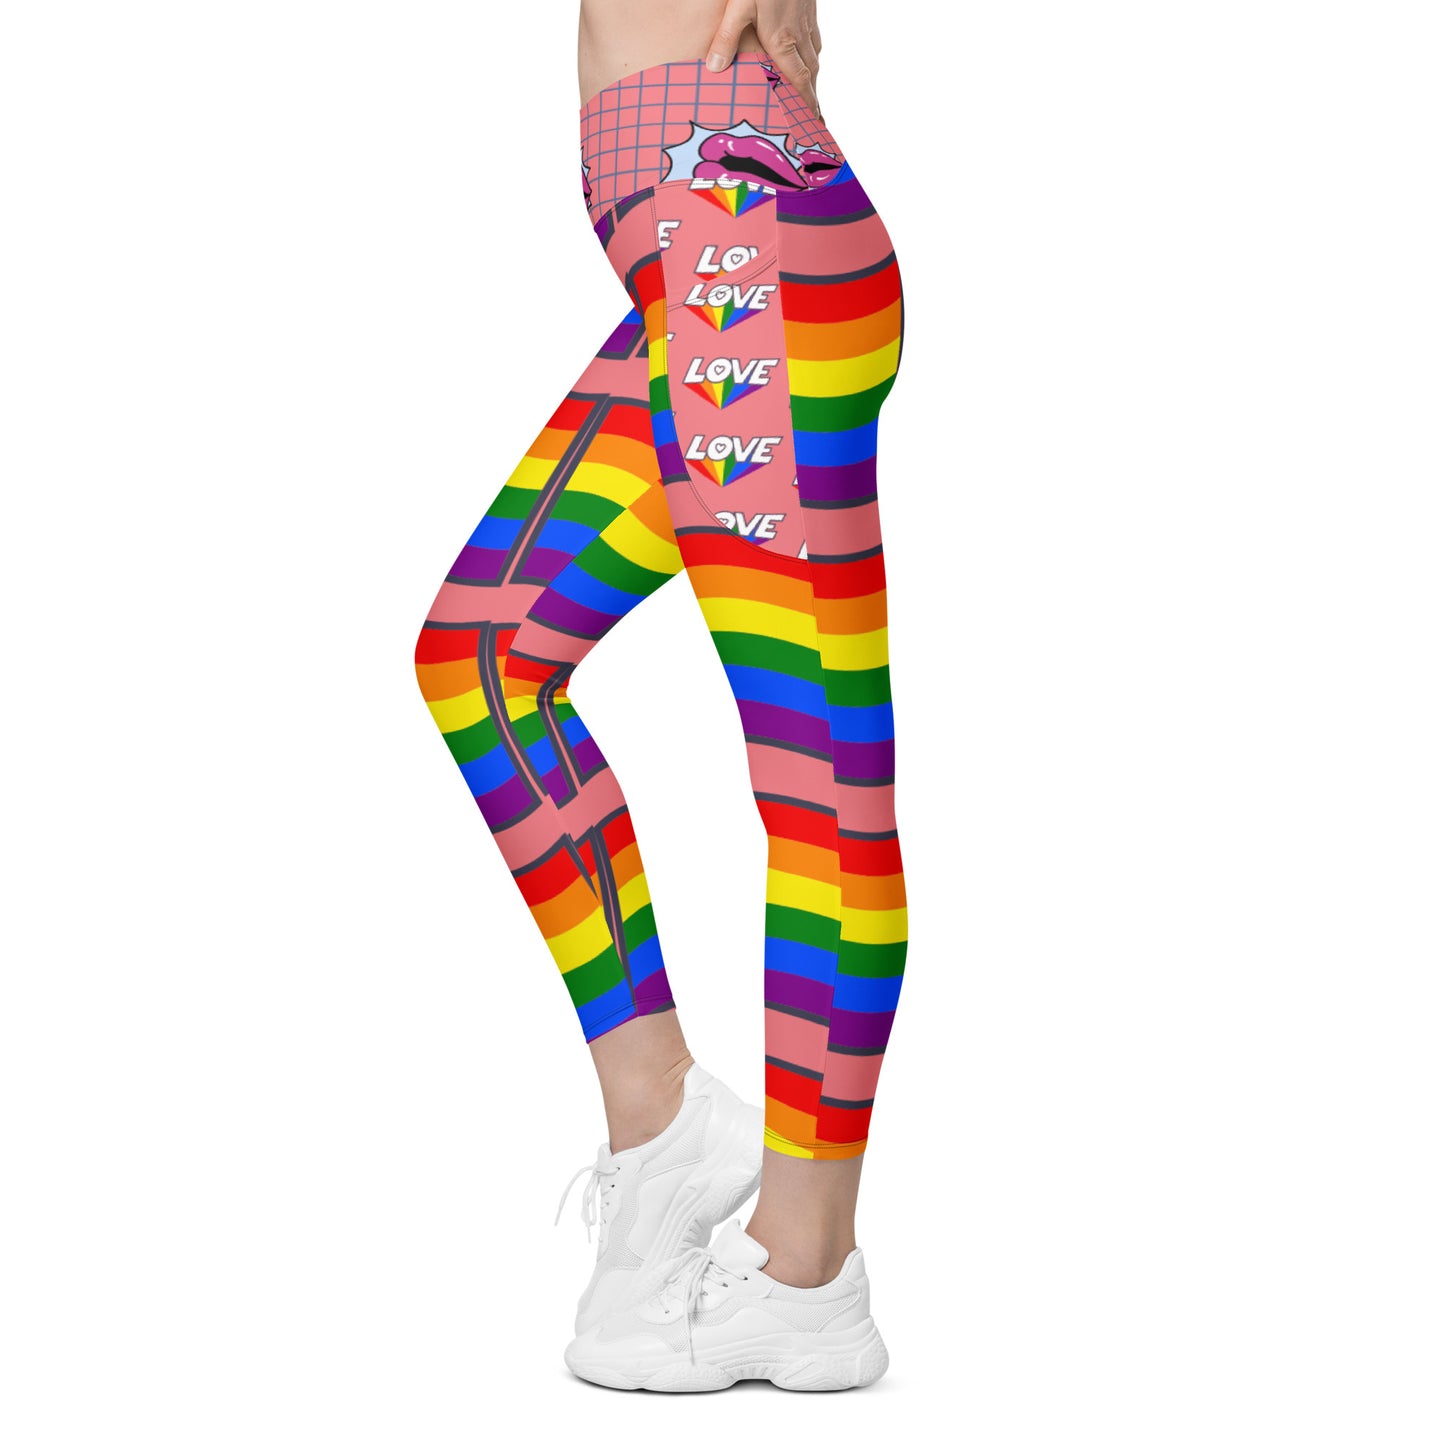 LOVE PRIDE Crossover leggings with pockets sizes 2SX-3XL